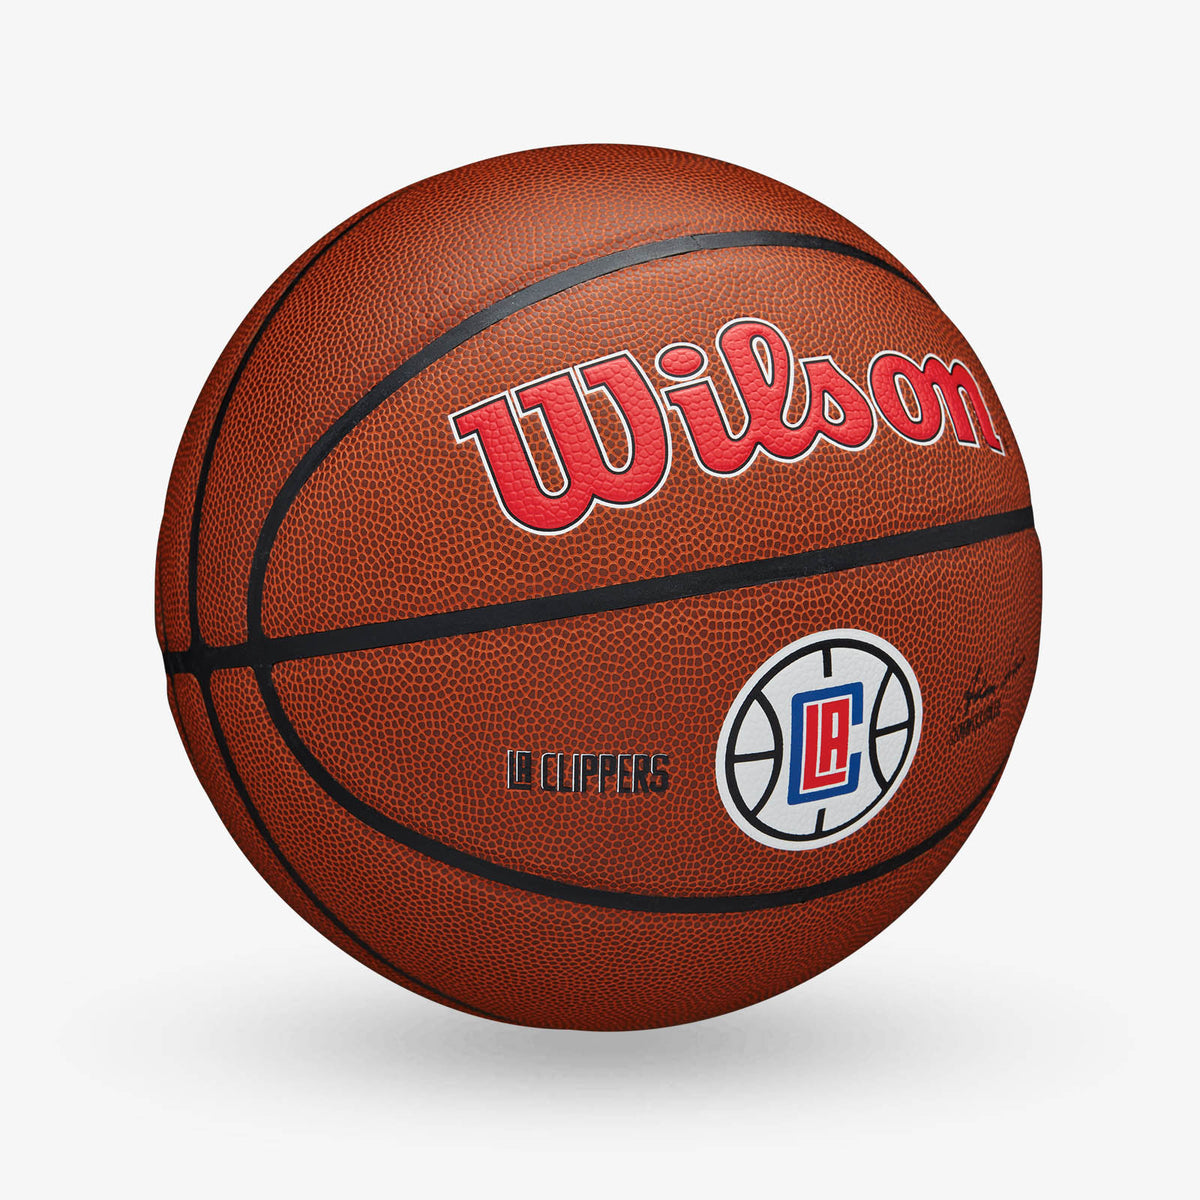 Los Angeles Clippers NBA Team Alliance Basketball - Size 7